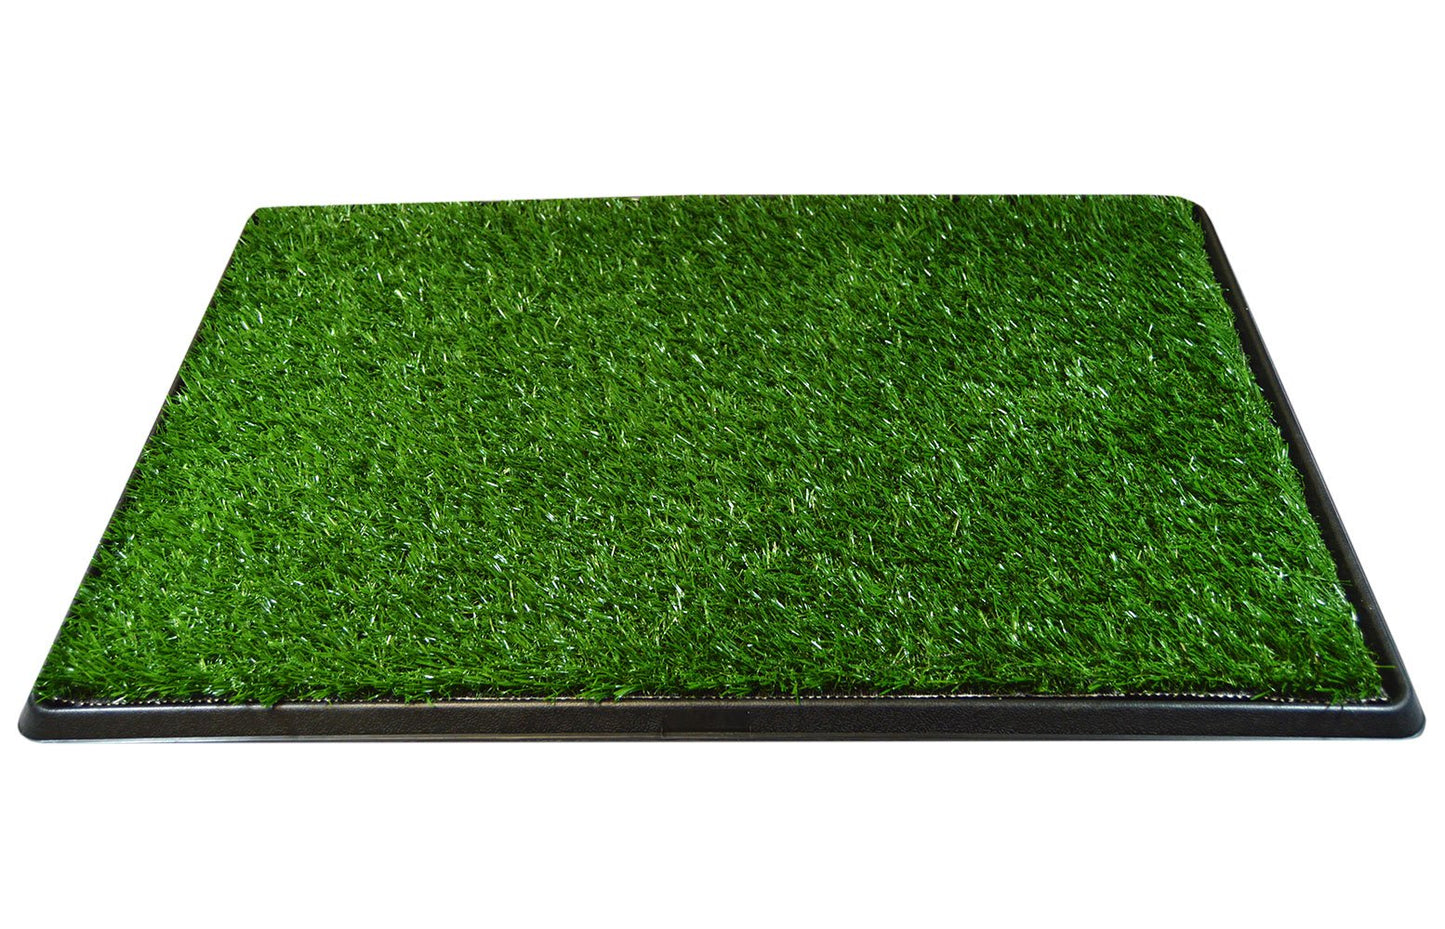 Pet Dog Pee Turf Bathroom Relief System - 3 Layers